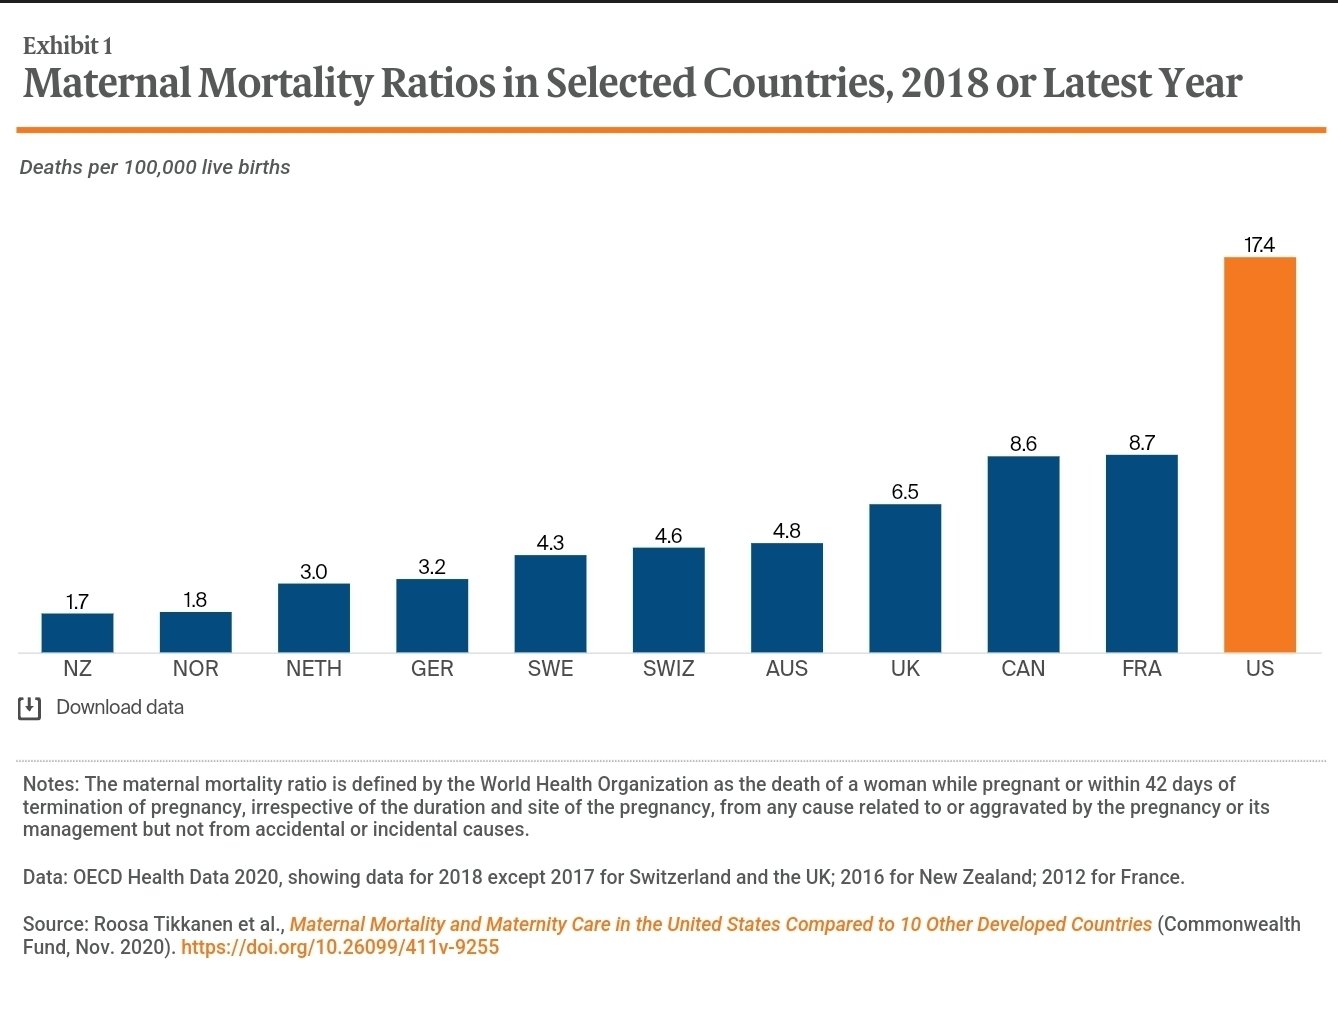 Source: Roosa Tikkanen et al., Maternal Mortality and Maternity Care in the United States Compared to 10 Other Developed Countries (Commonwealth Fund, Nov. 2020). https://doi.org/10.26099/411v-9255L